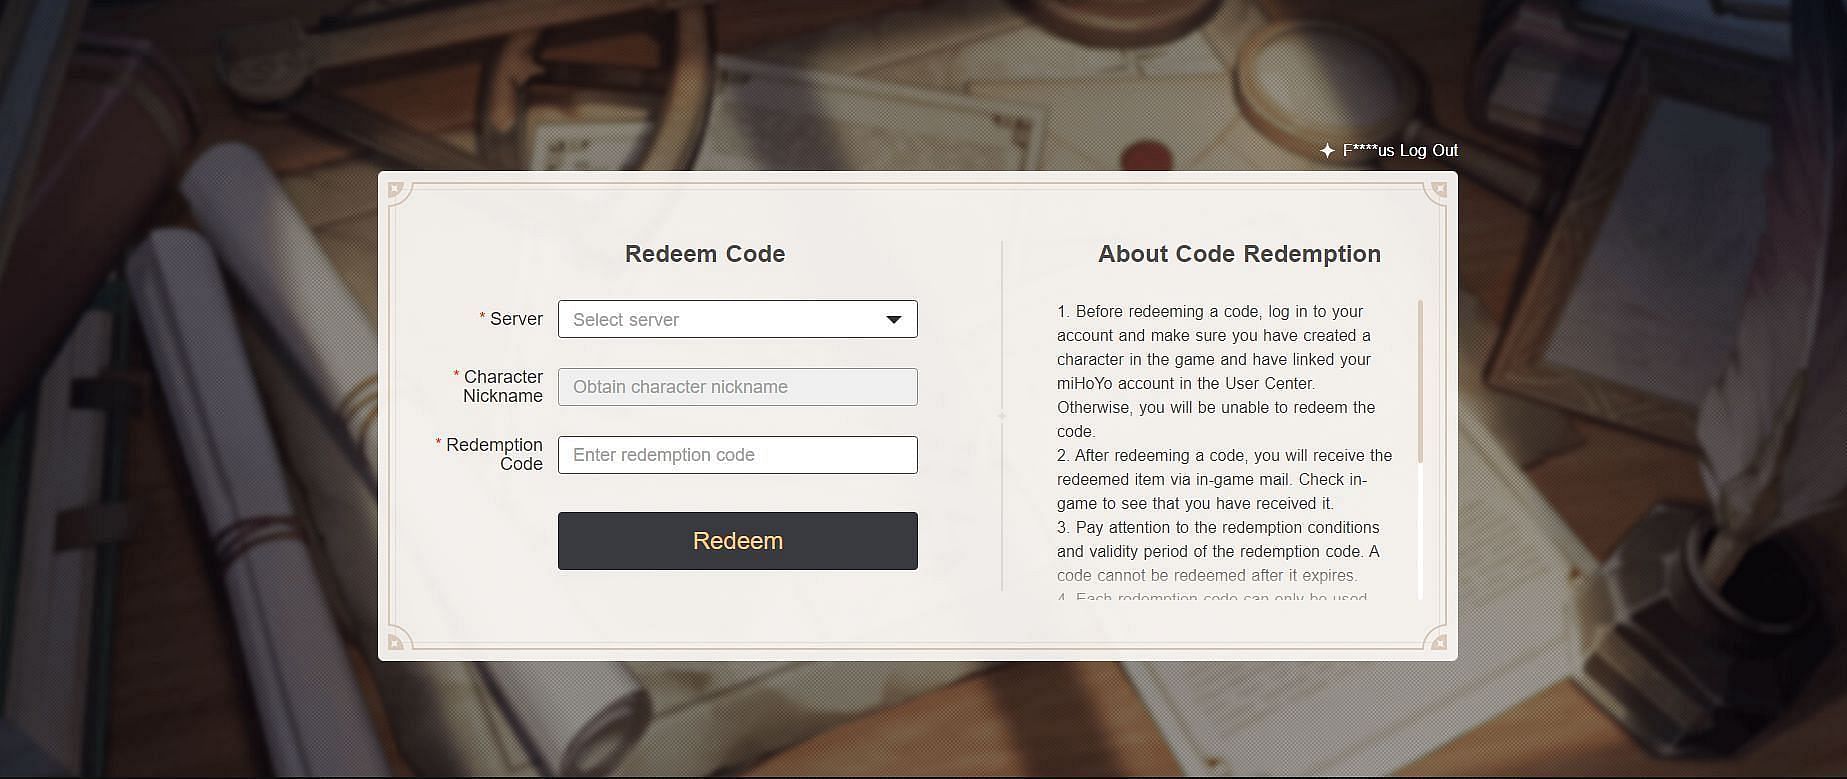 Official redemption site to redeem codes (Image via HoYoverse)